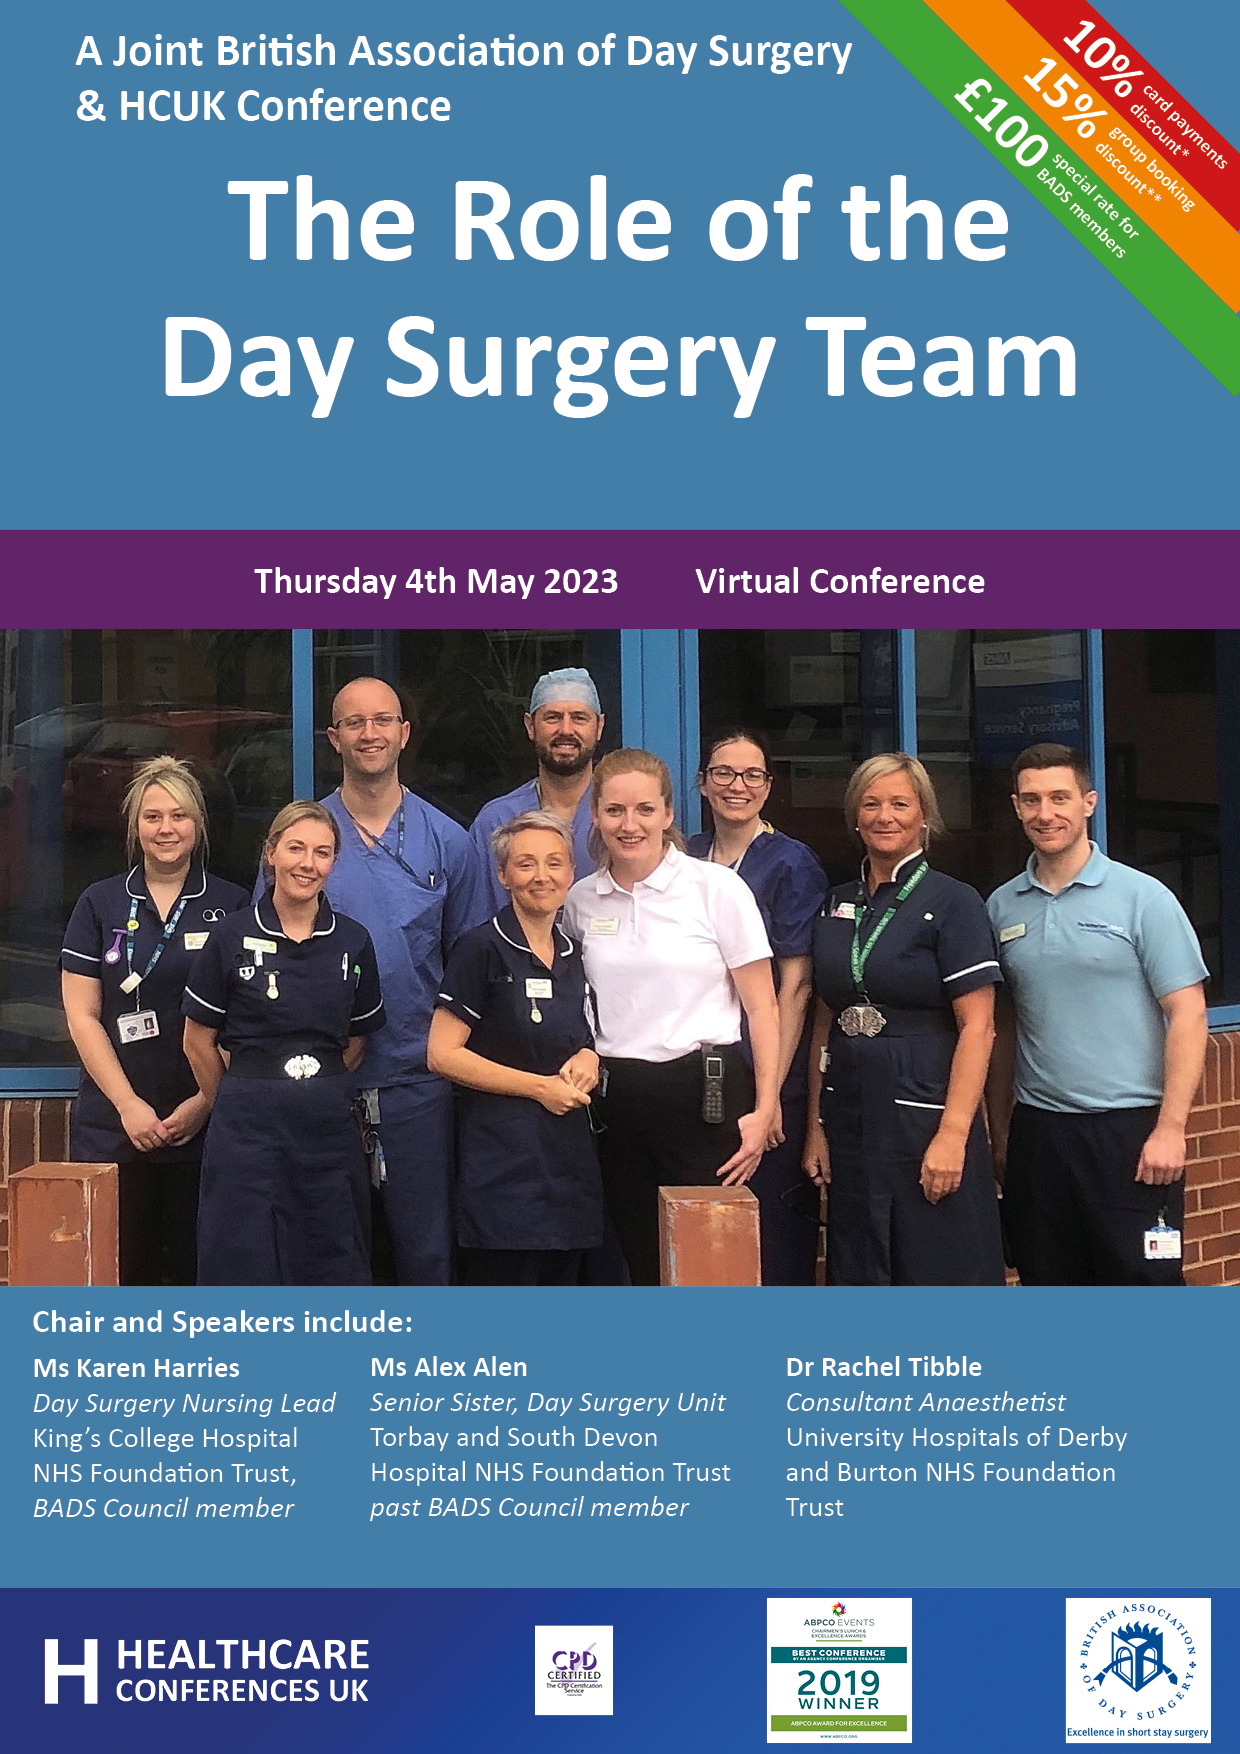 The Role of the Day Surgery Team - A Joint British Association of Day Surgery & HCUK Virtual Conference